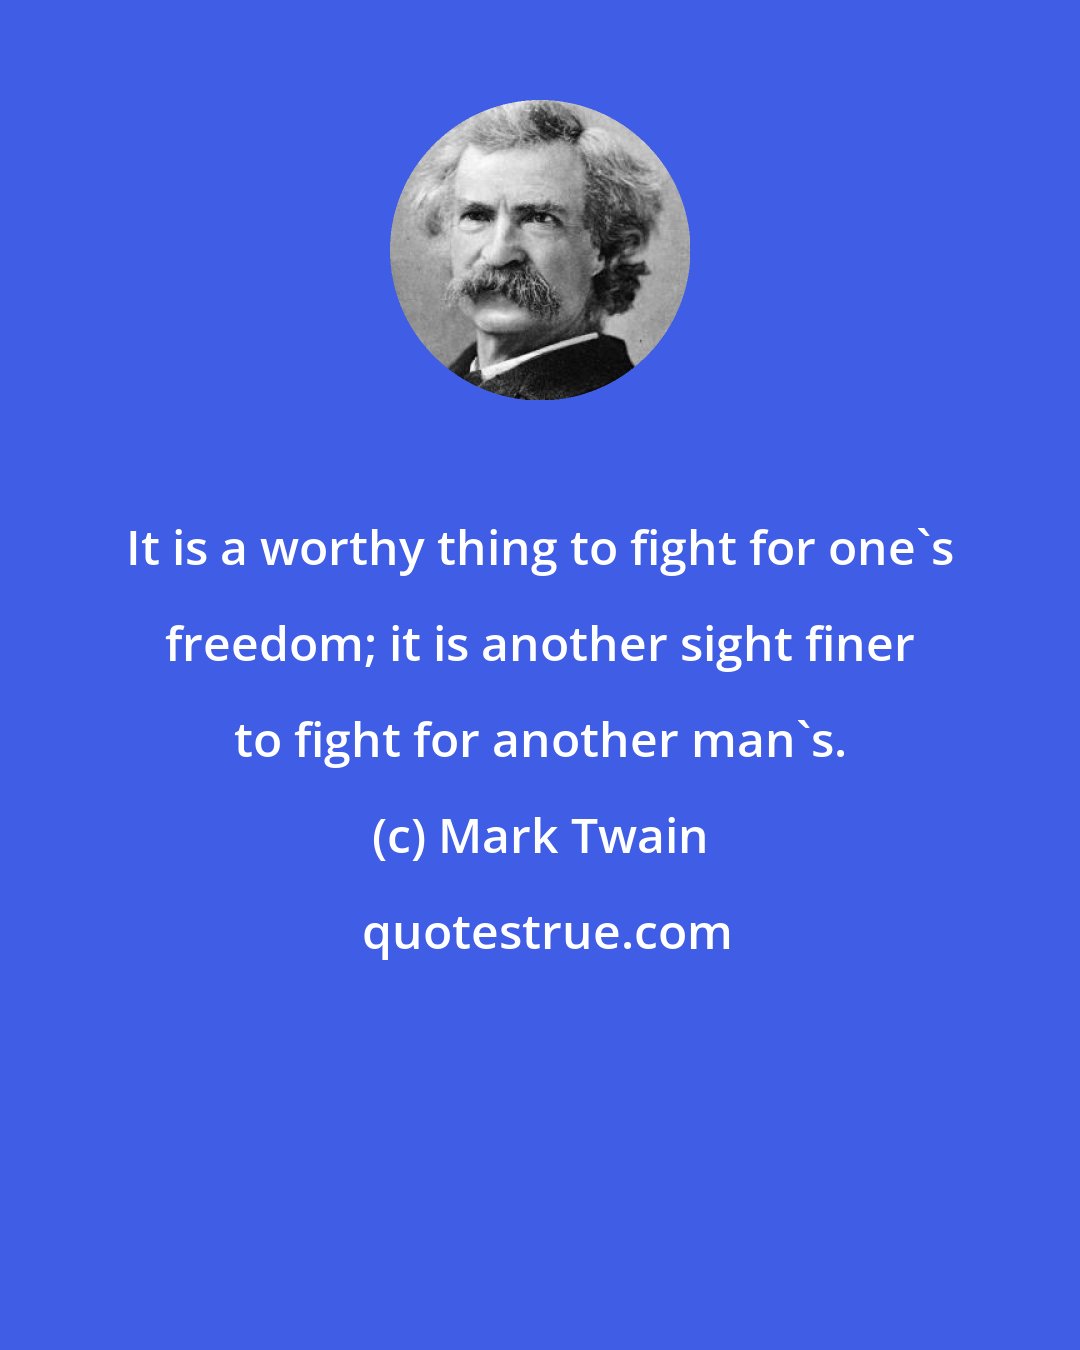 Mark Twain: It is a worthy thing to fight for one's freedom; it is another sight finer to fight for another man's.